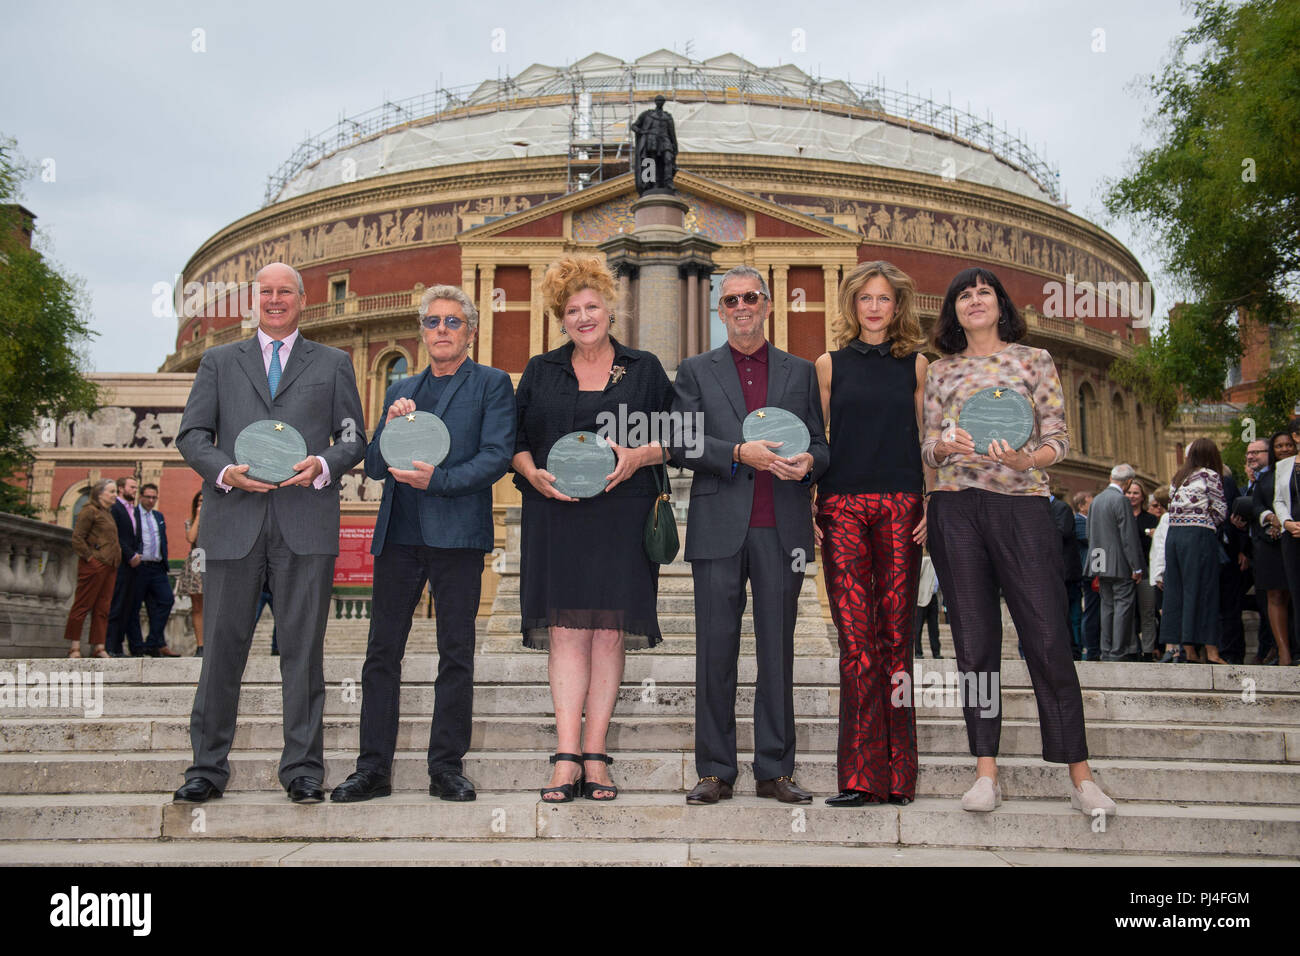 (left to right) Randolph Churchill, Roger Daltry, Eve Ferret of Chelsea Arts Club, Eric Clapton, Katie Derham and Women's Equality Party founder Catherine Mayer outside the Royal Albert Hall, London, at the unveiling of 11 engraved stones recognising key people in the building's history ahead of its 150th anniversary. Stock Photo